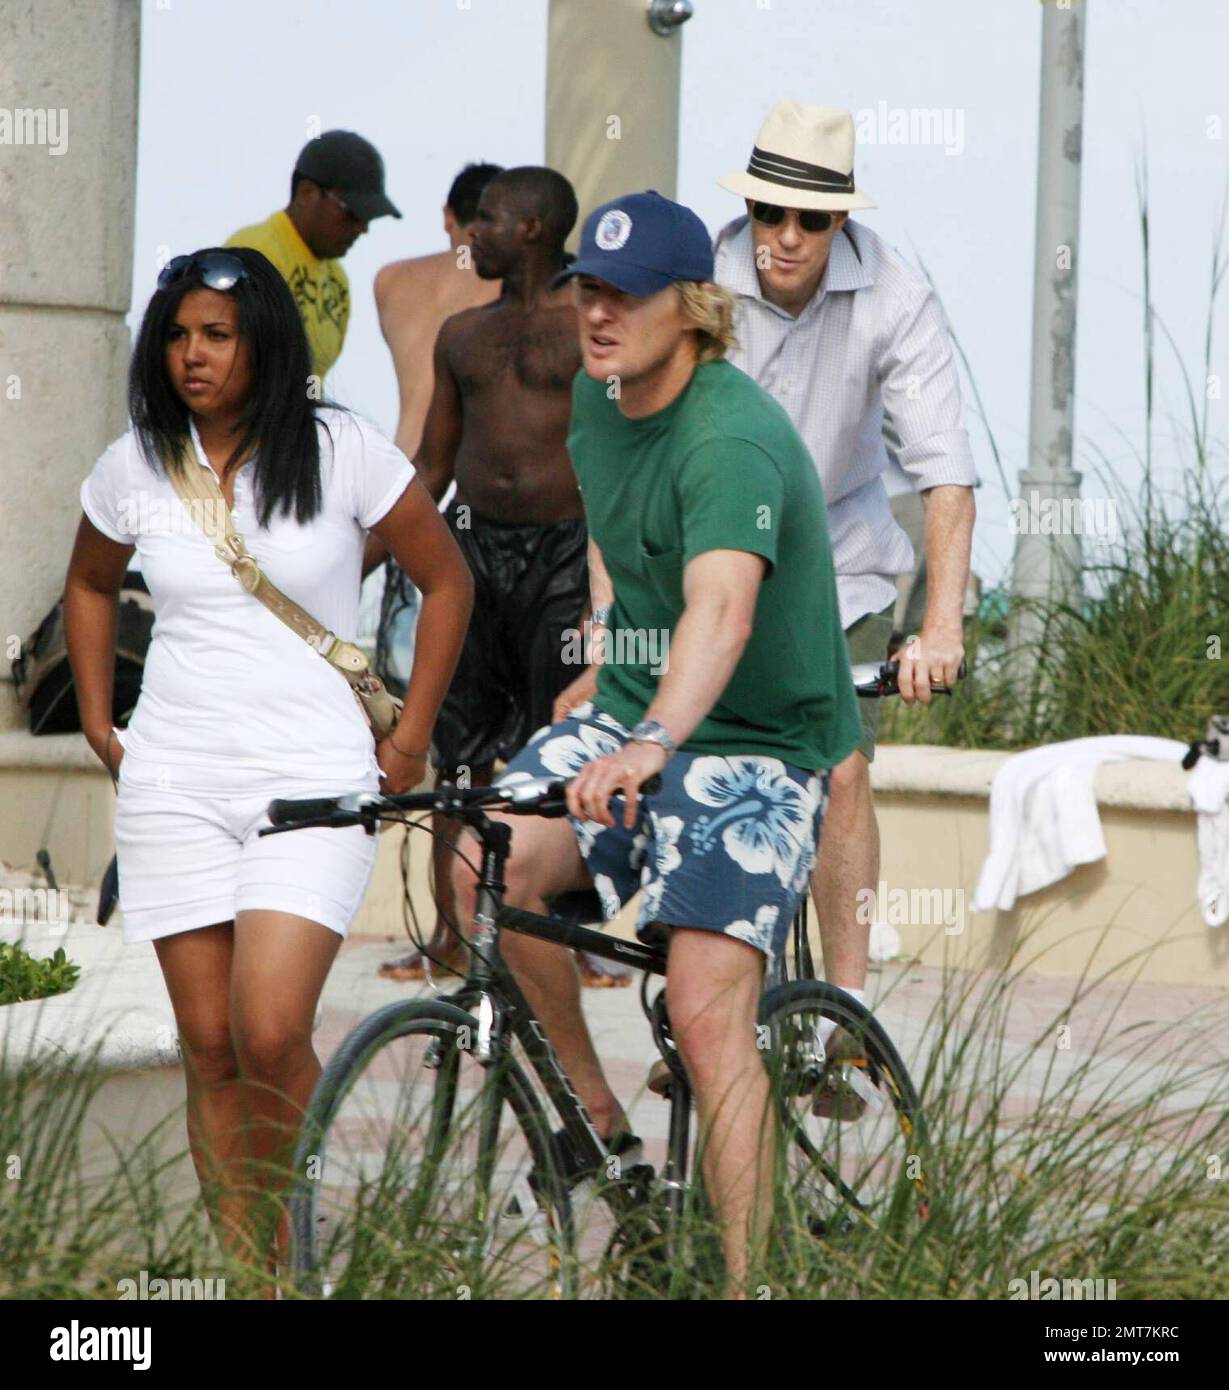 Exclusive!!  Owen Wilson and Vince Vaughn take a Sunday afternoon bike ride along the Miami Beach boardwalk.  The Wedding Crashers buddies also stopped at the Miami Beach Polo World Cup where they chatted to a few ladies in the crowd.  Miami, FL 4/27/08 Stock Photo